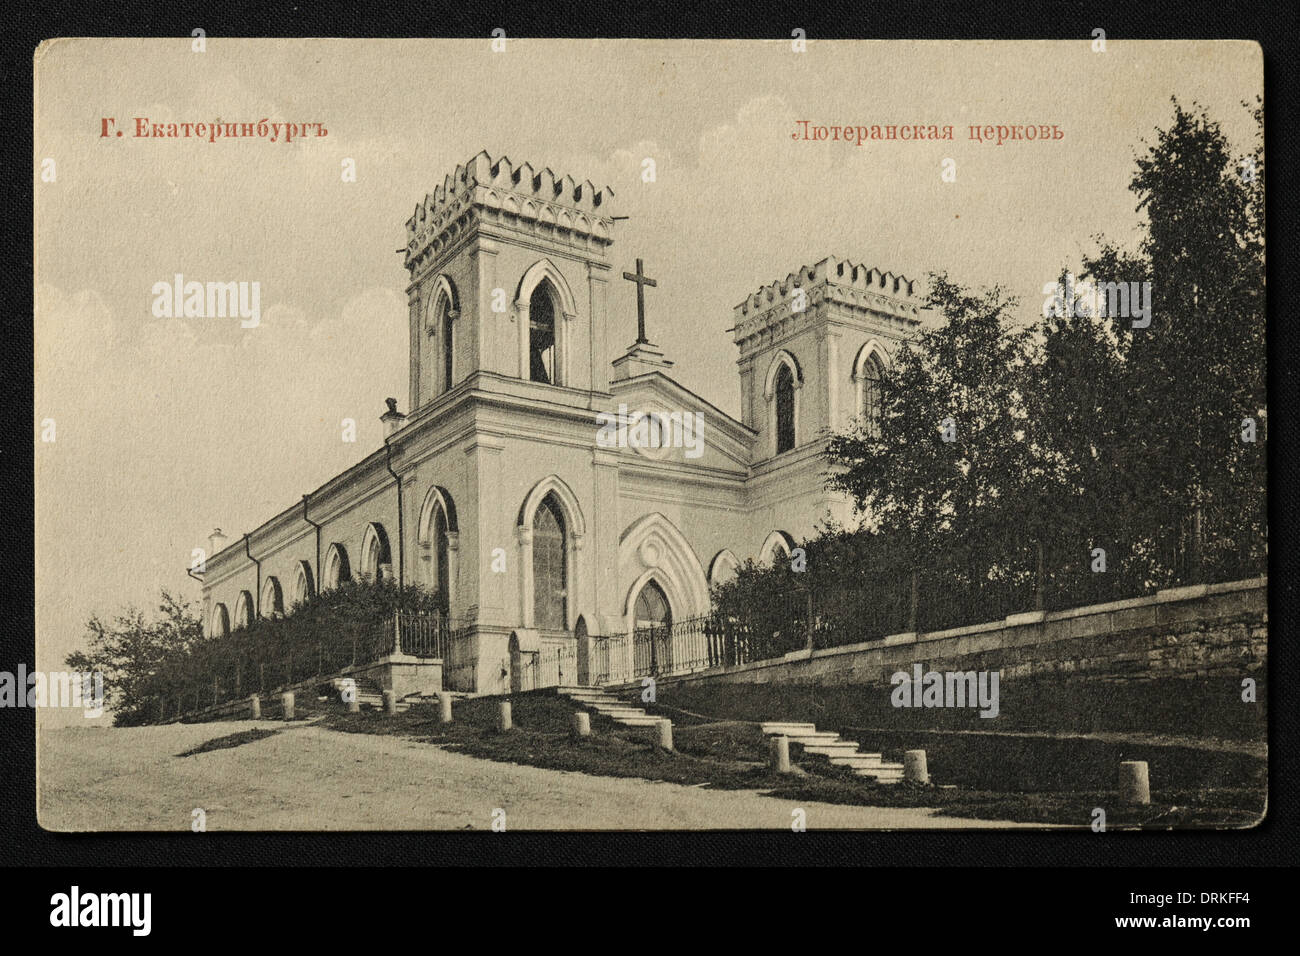 Lutheran Church in Yekaterinburg, Russian Empire. Black and white vintage photograph by Russian photographer Veniamin Metenkov dated from the beginning of the 20th century issued in the Russian vintage postcard published by Veniamin Metenkov himself in Yekaterinburg. Text in Russian: Yekaterinburg. Lutheran Church. The church was demolished by the Bolsheviks in the 1930s. Courtesy of the Azoor Postcard Collection. Stock Photo